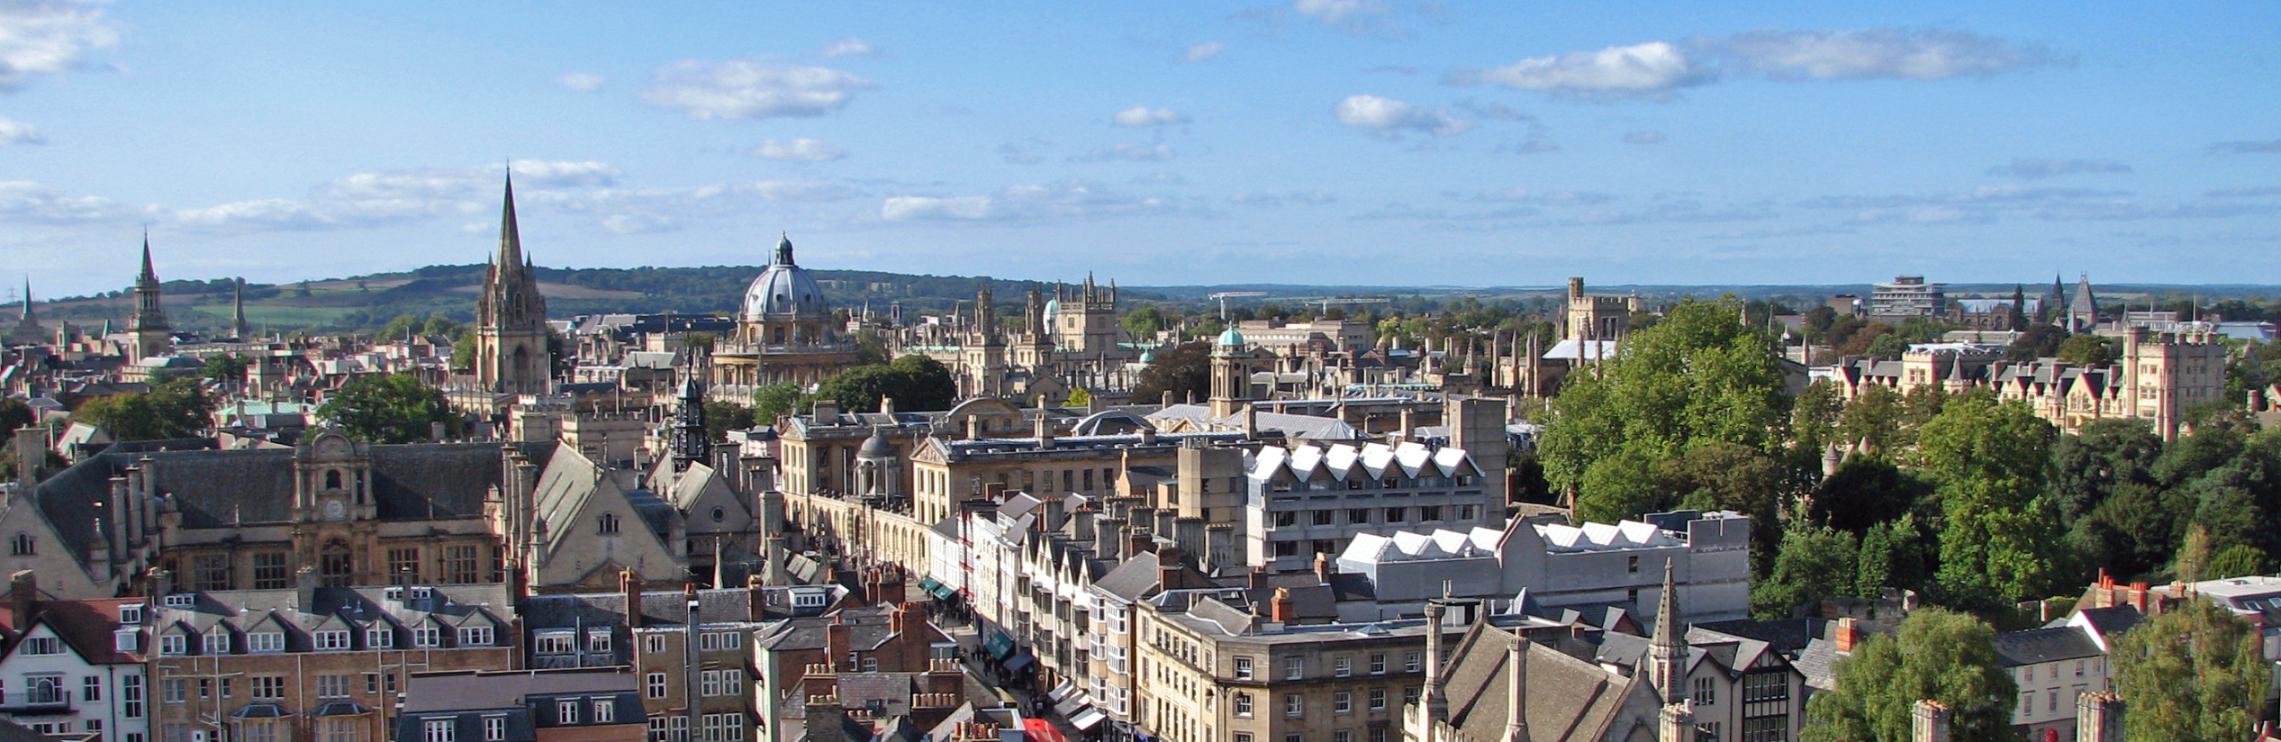 View of Oxford High Street and skyline